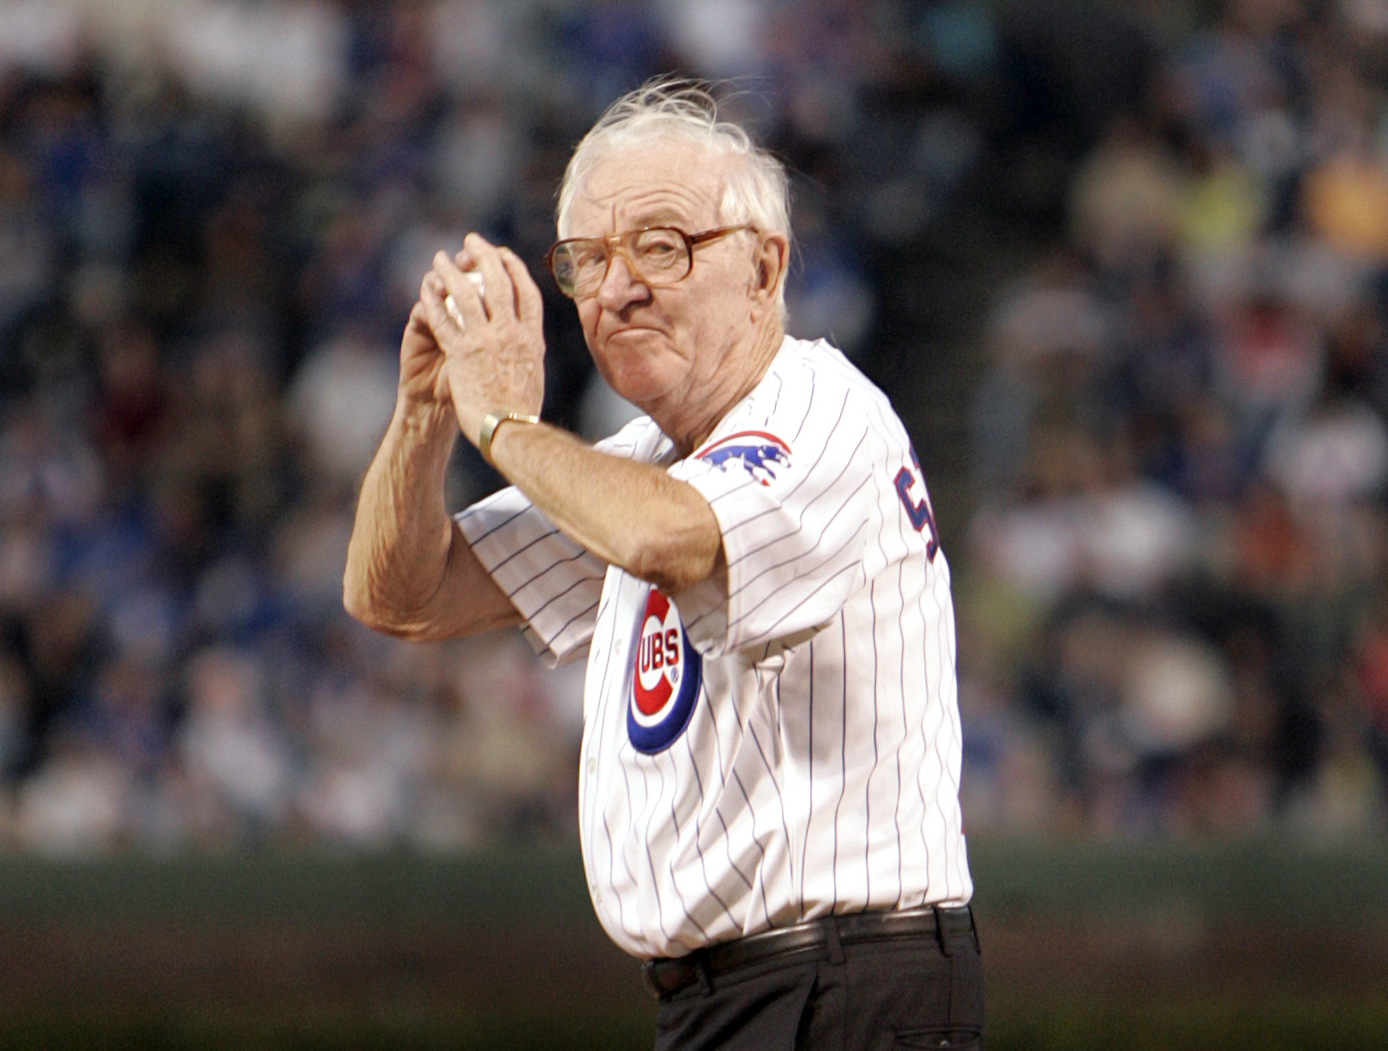 John Paul Stevens winds up to throw out the first pitch before the start of the Chicago Cubs game with the Cincinnati Reds, in Chicago, on Sept. 14, 2005. (Jeff Roberson—AP)